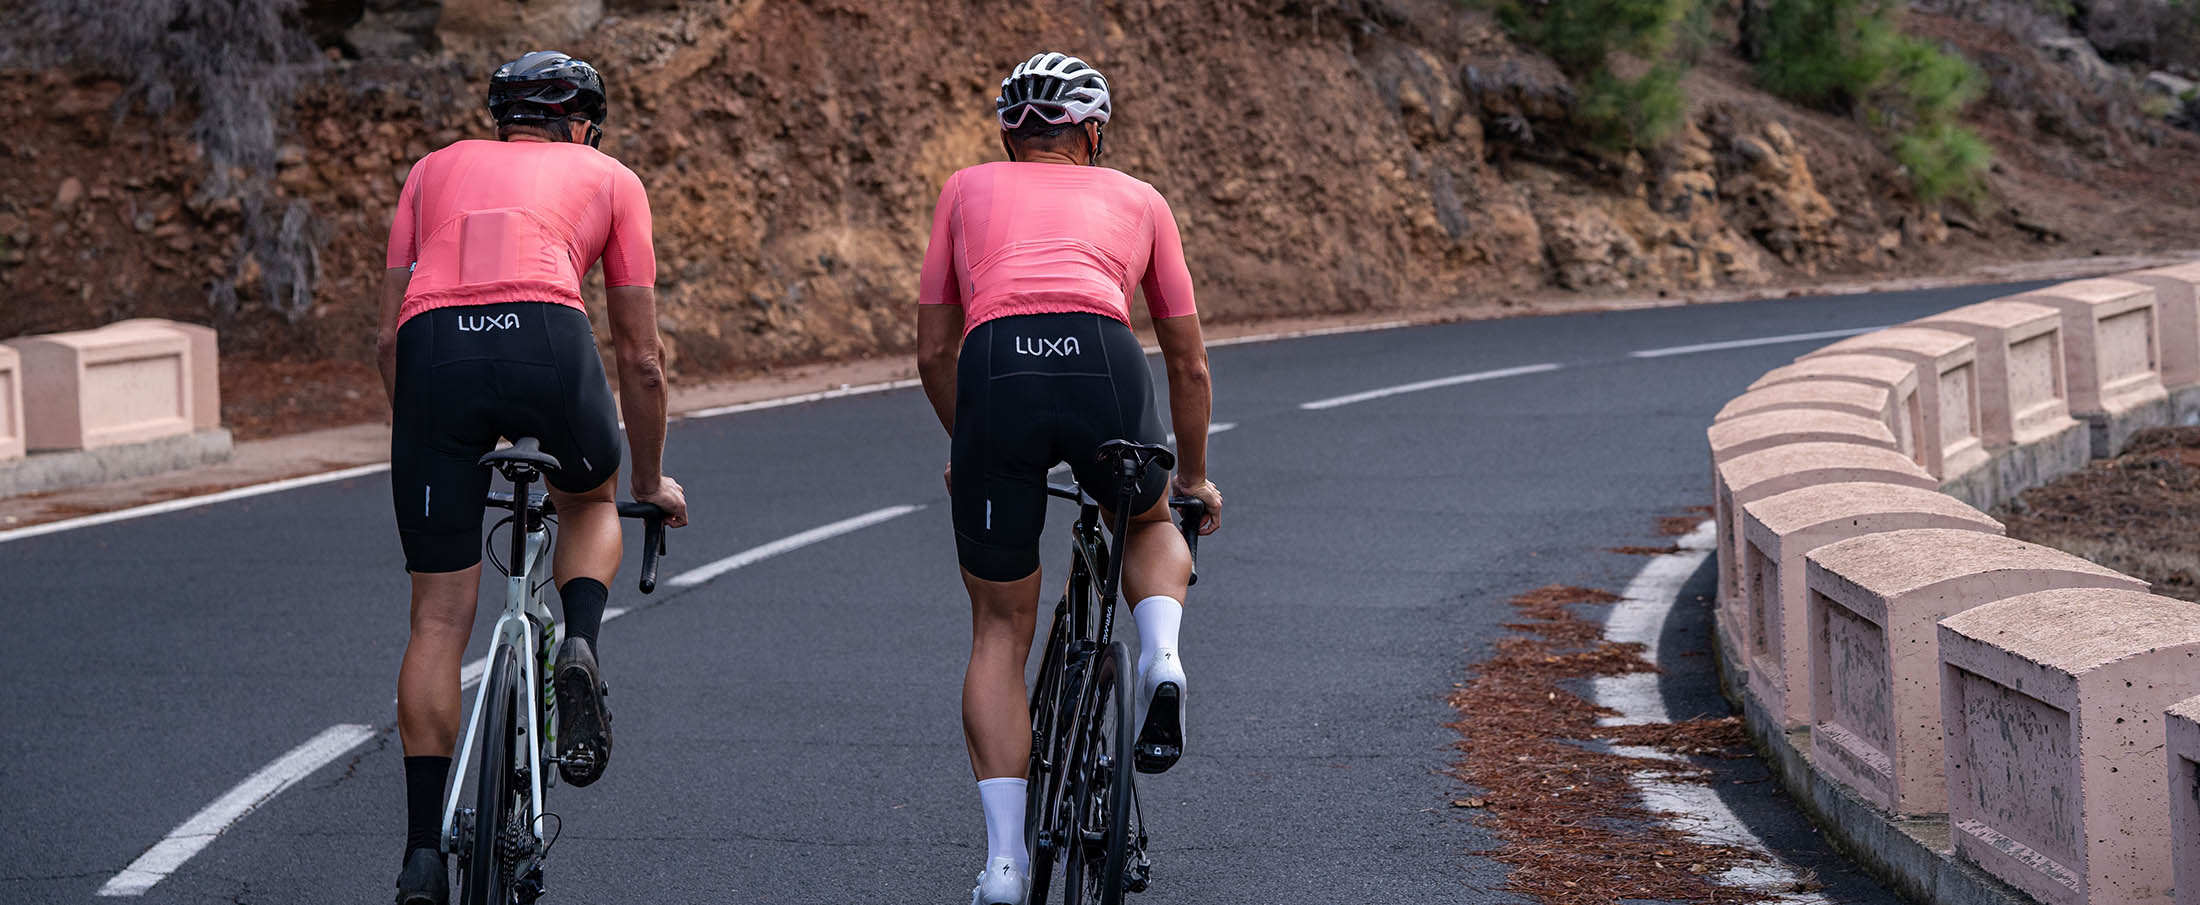 Luxa socks for road cyclists made in europe with &#039;beer ride&#039; sentence at the back